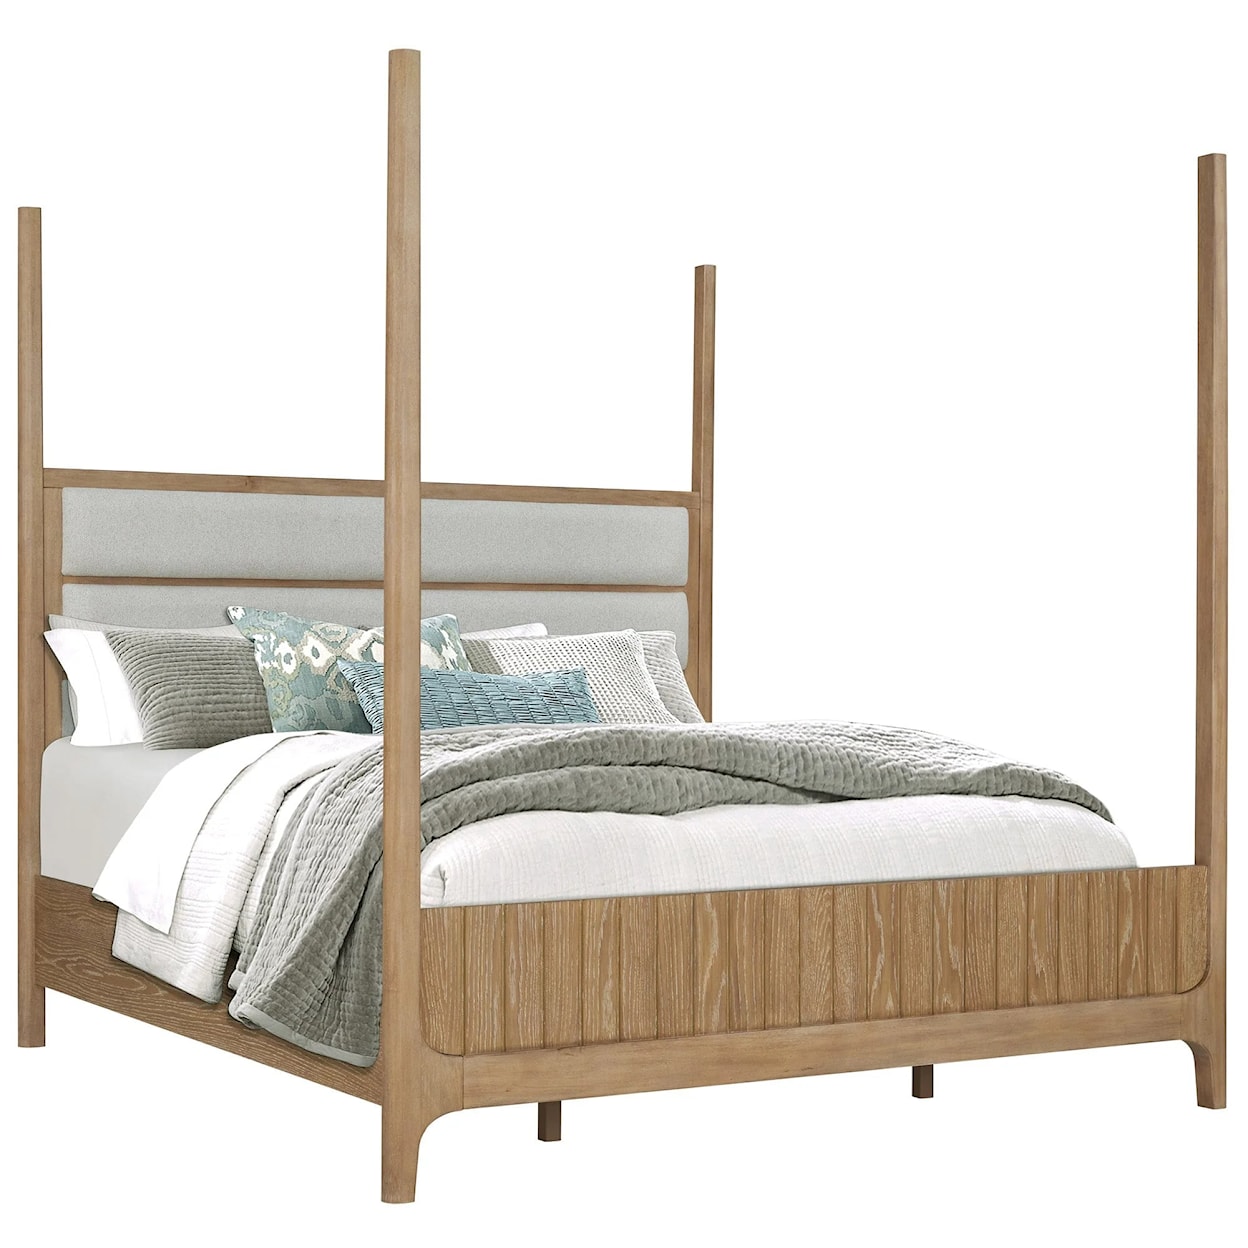 Paramount Furniture Escape King Poster Bed